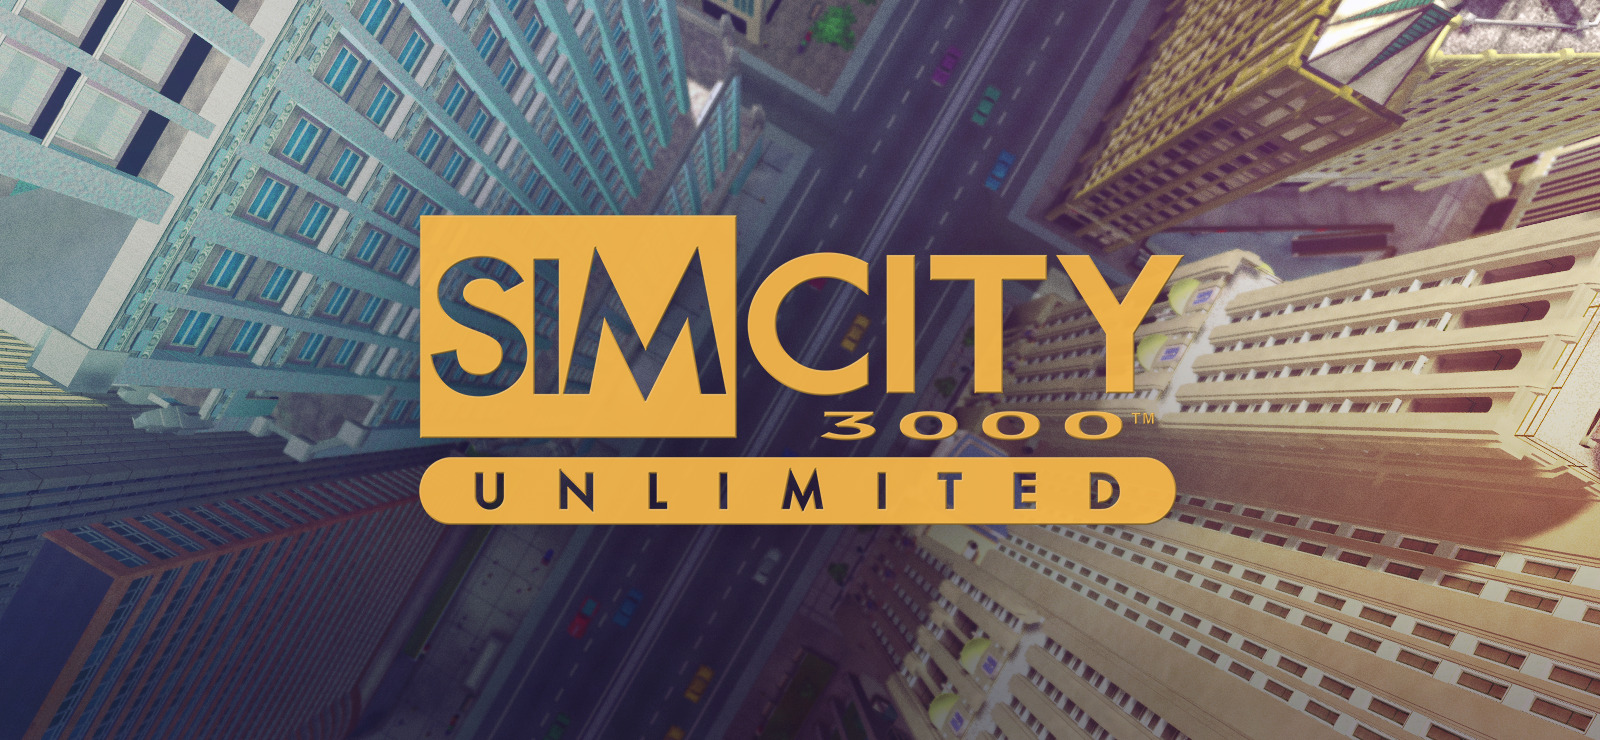 75 Simcity 3000 Unlimited On Gog Com